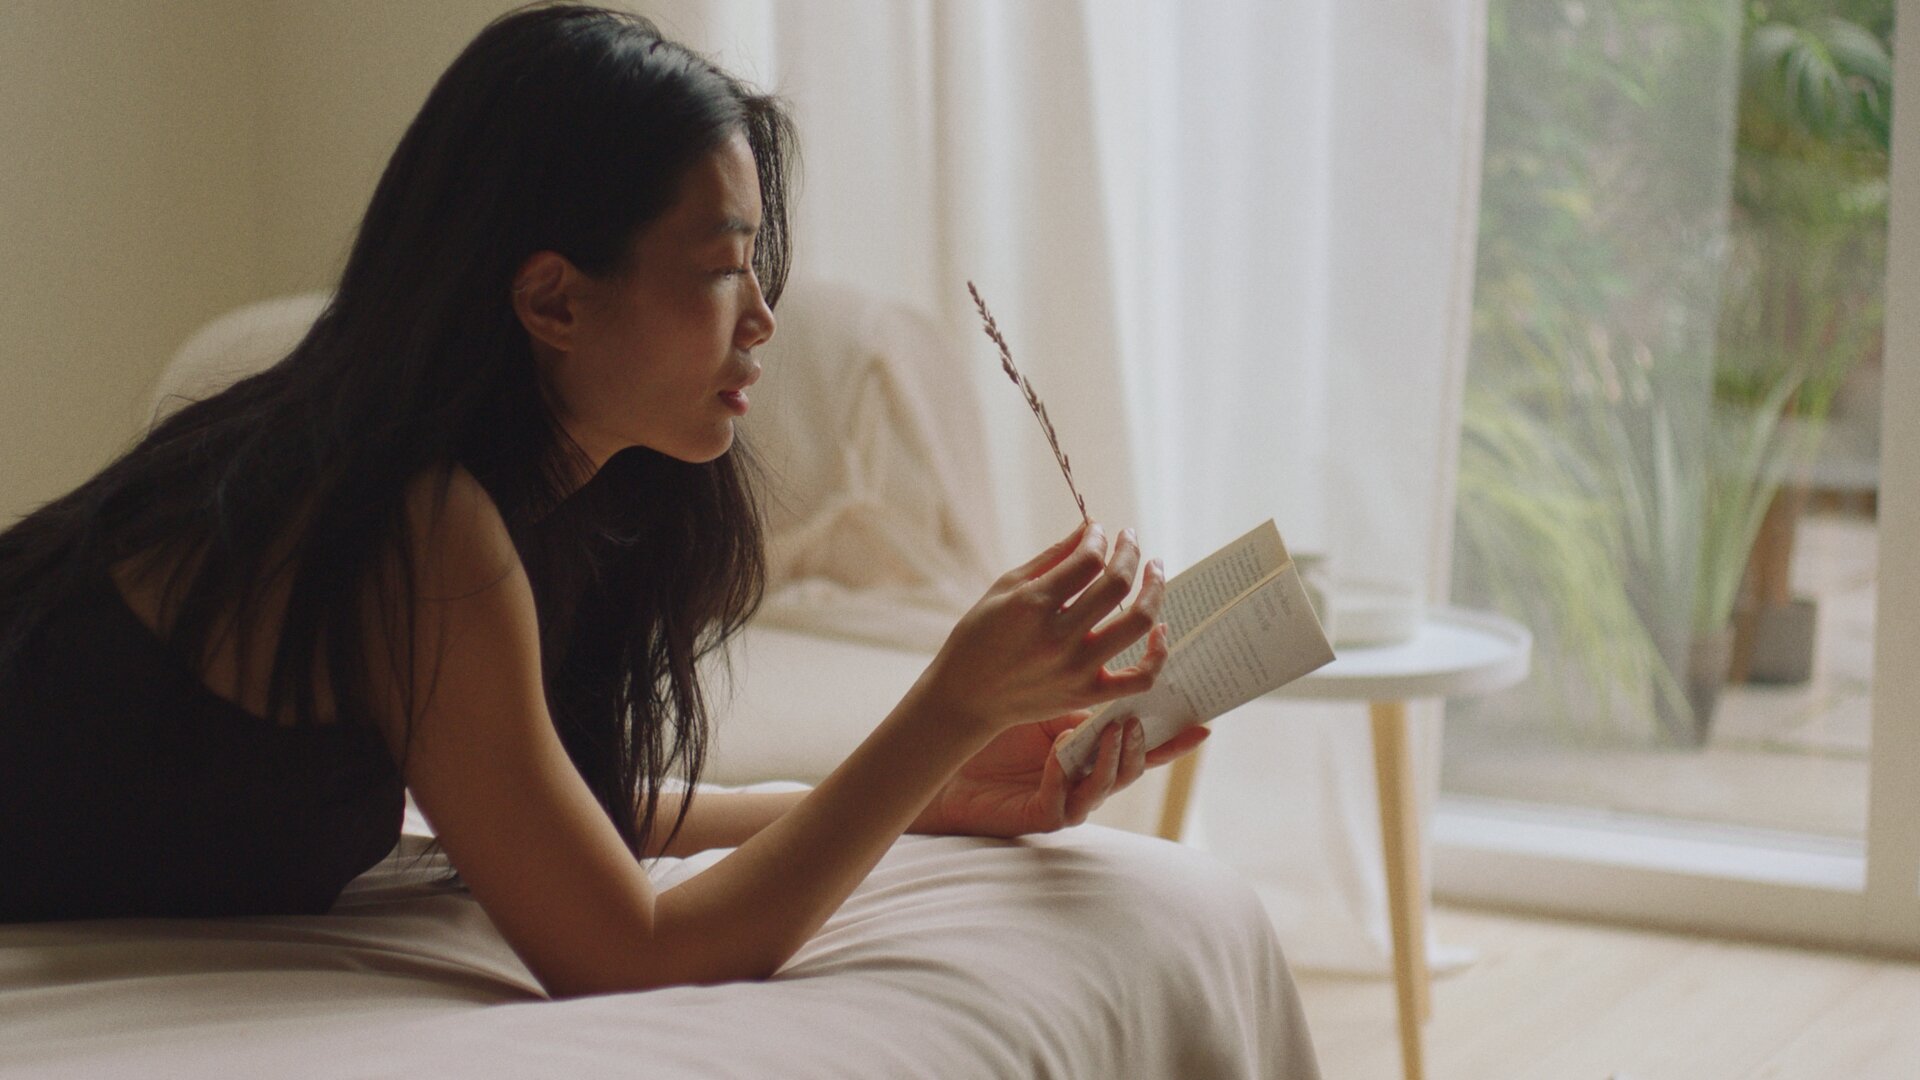 A woman lays on a bed outstretched reading a book and holding a flower, The Kiln video production